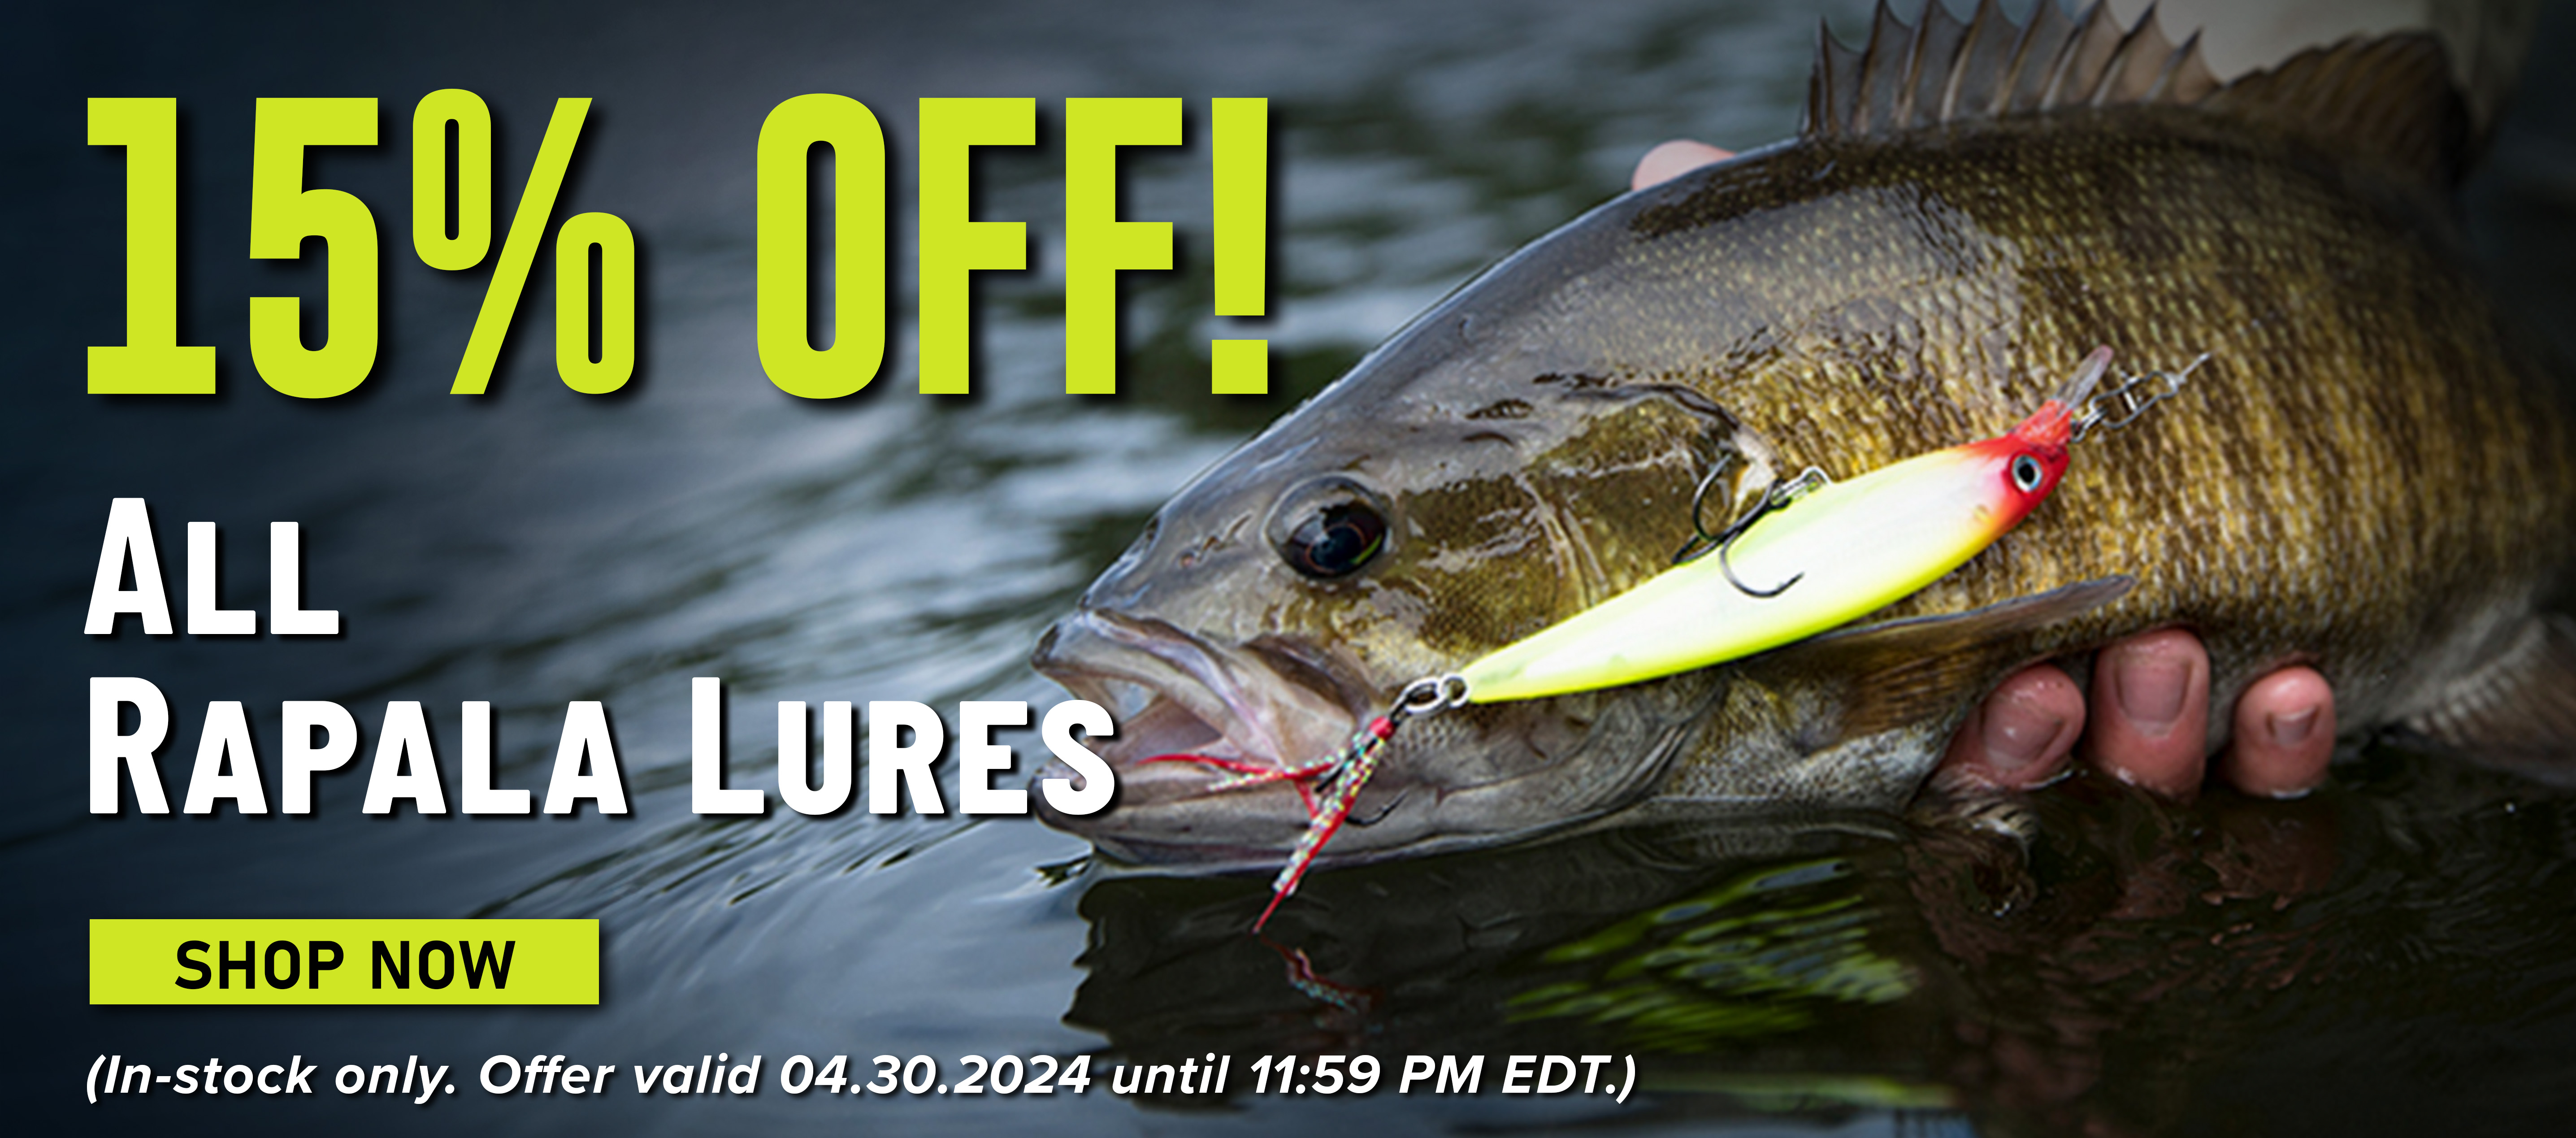 15% Off! All Rapala Lures Shop Now (In-stock only. Offer valid 04.30.2024 until 11:59 PM EDT.)